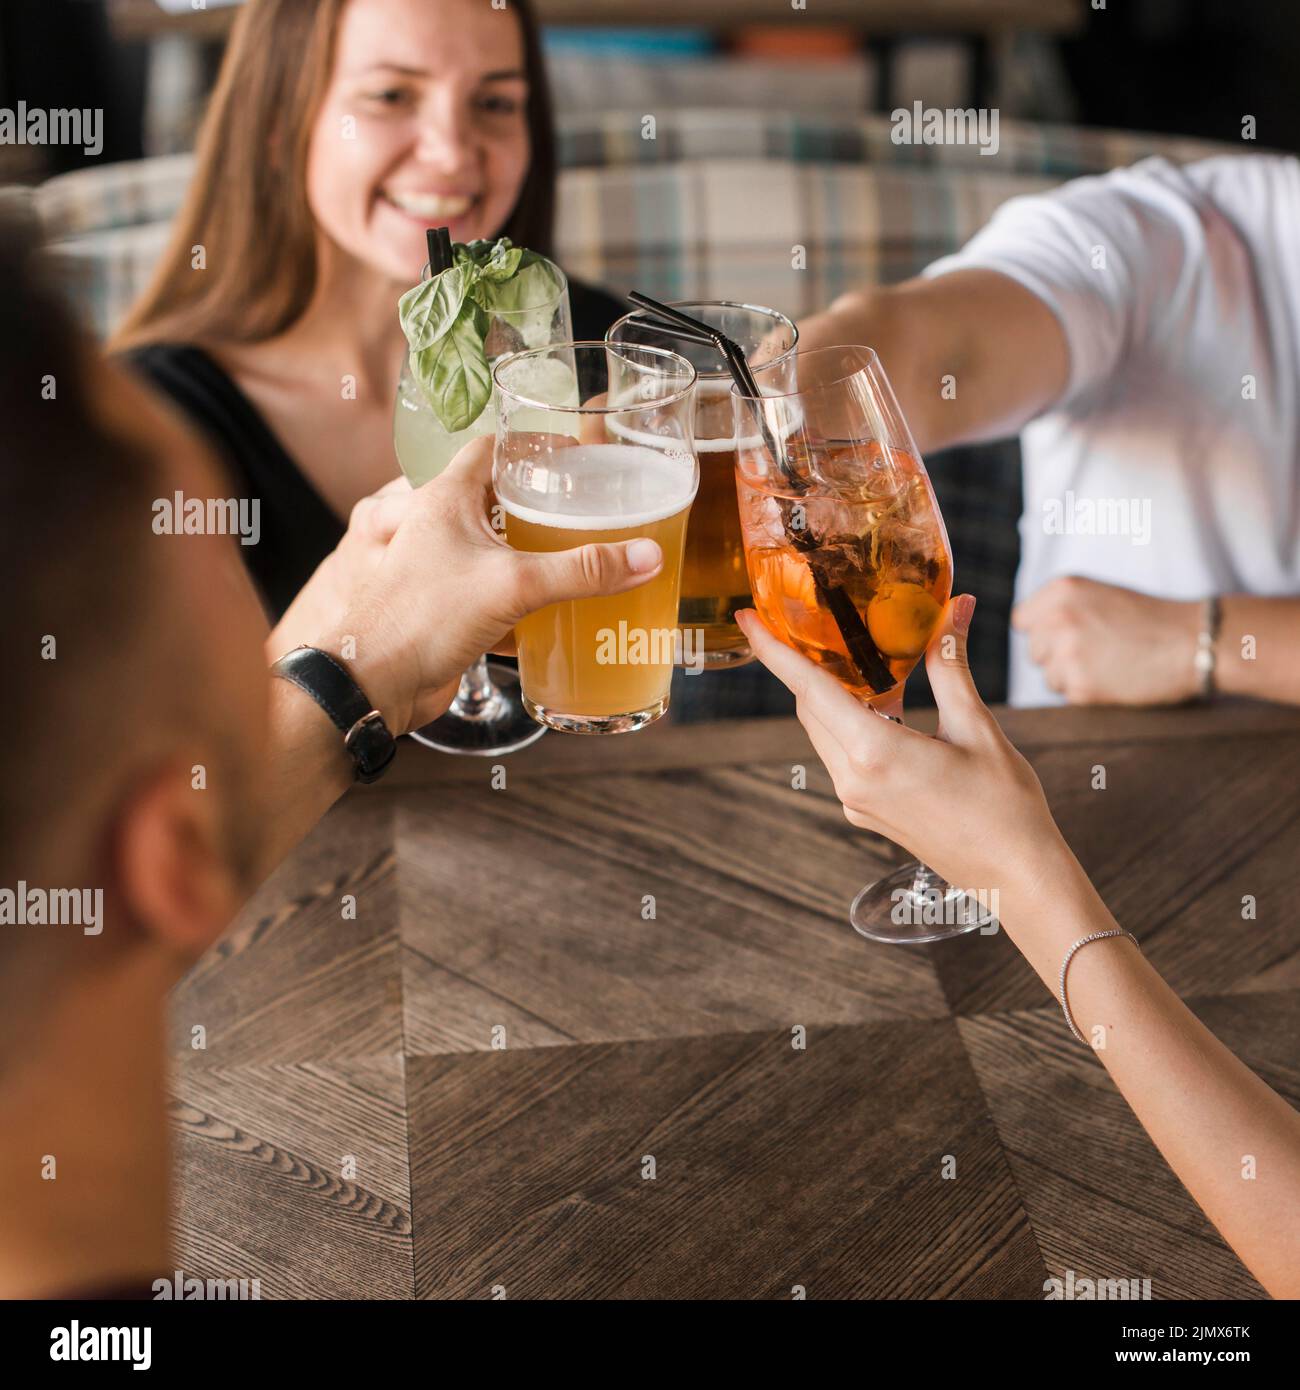 Friends sitting together bar toasting set drinks Stock Photo